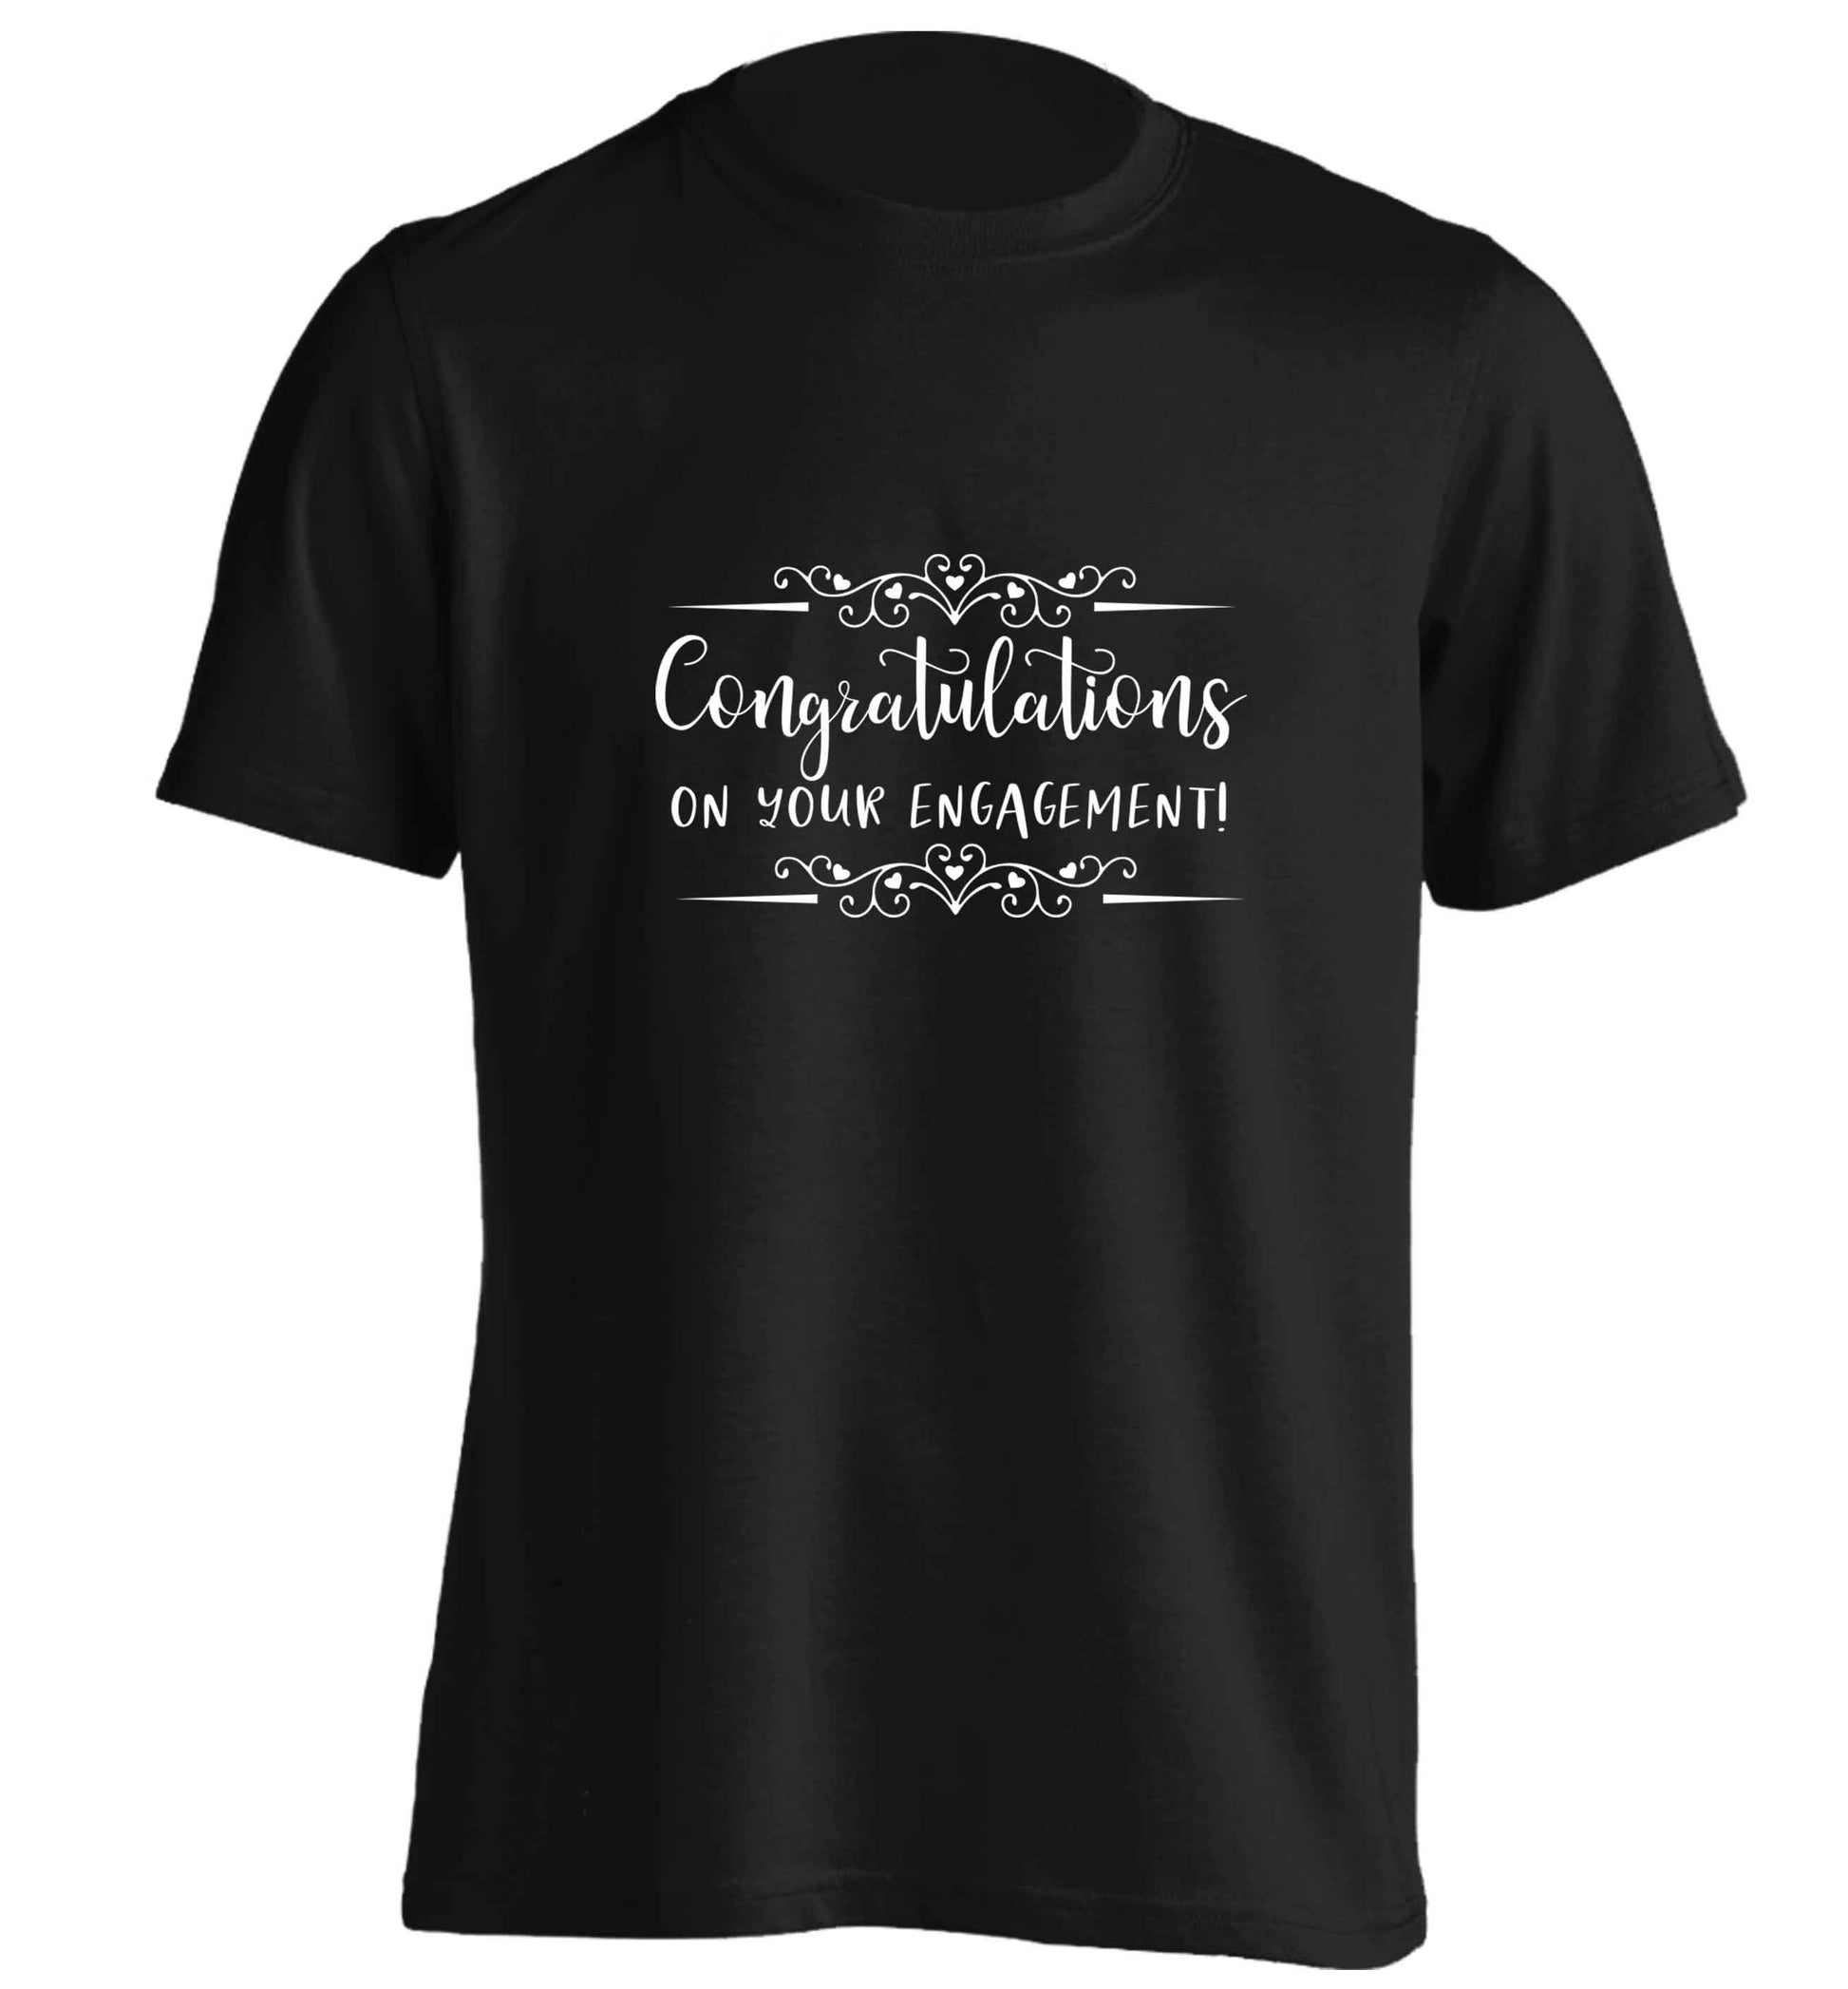 Congratulations on your engagement adults unisex black Tshirt 2XL